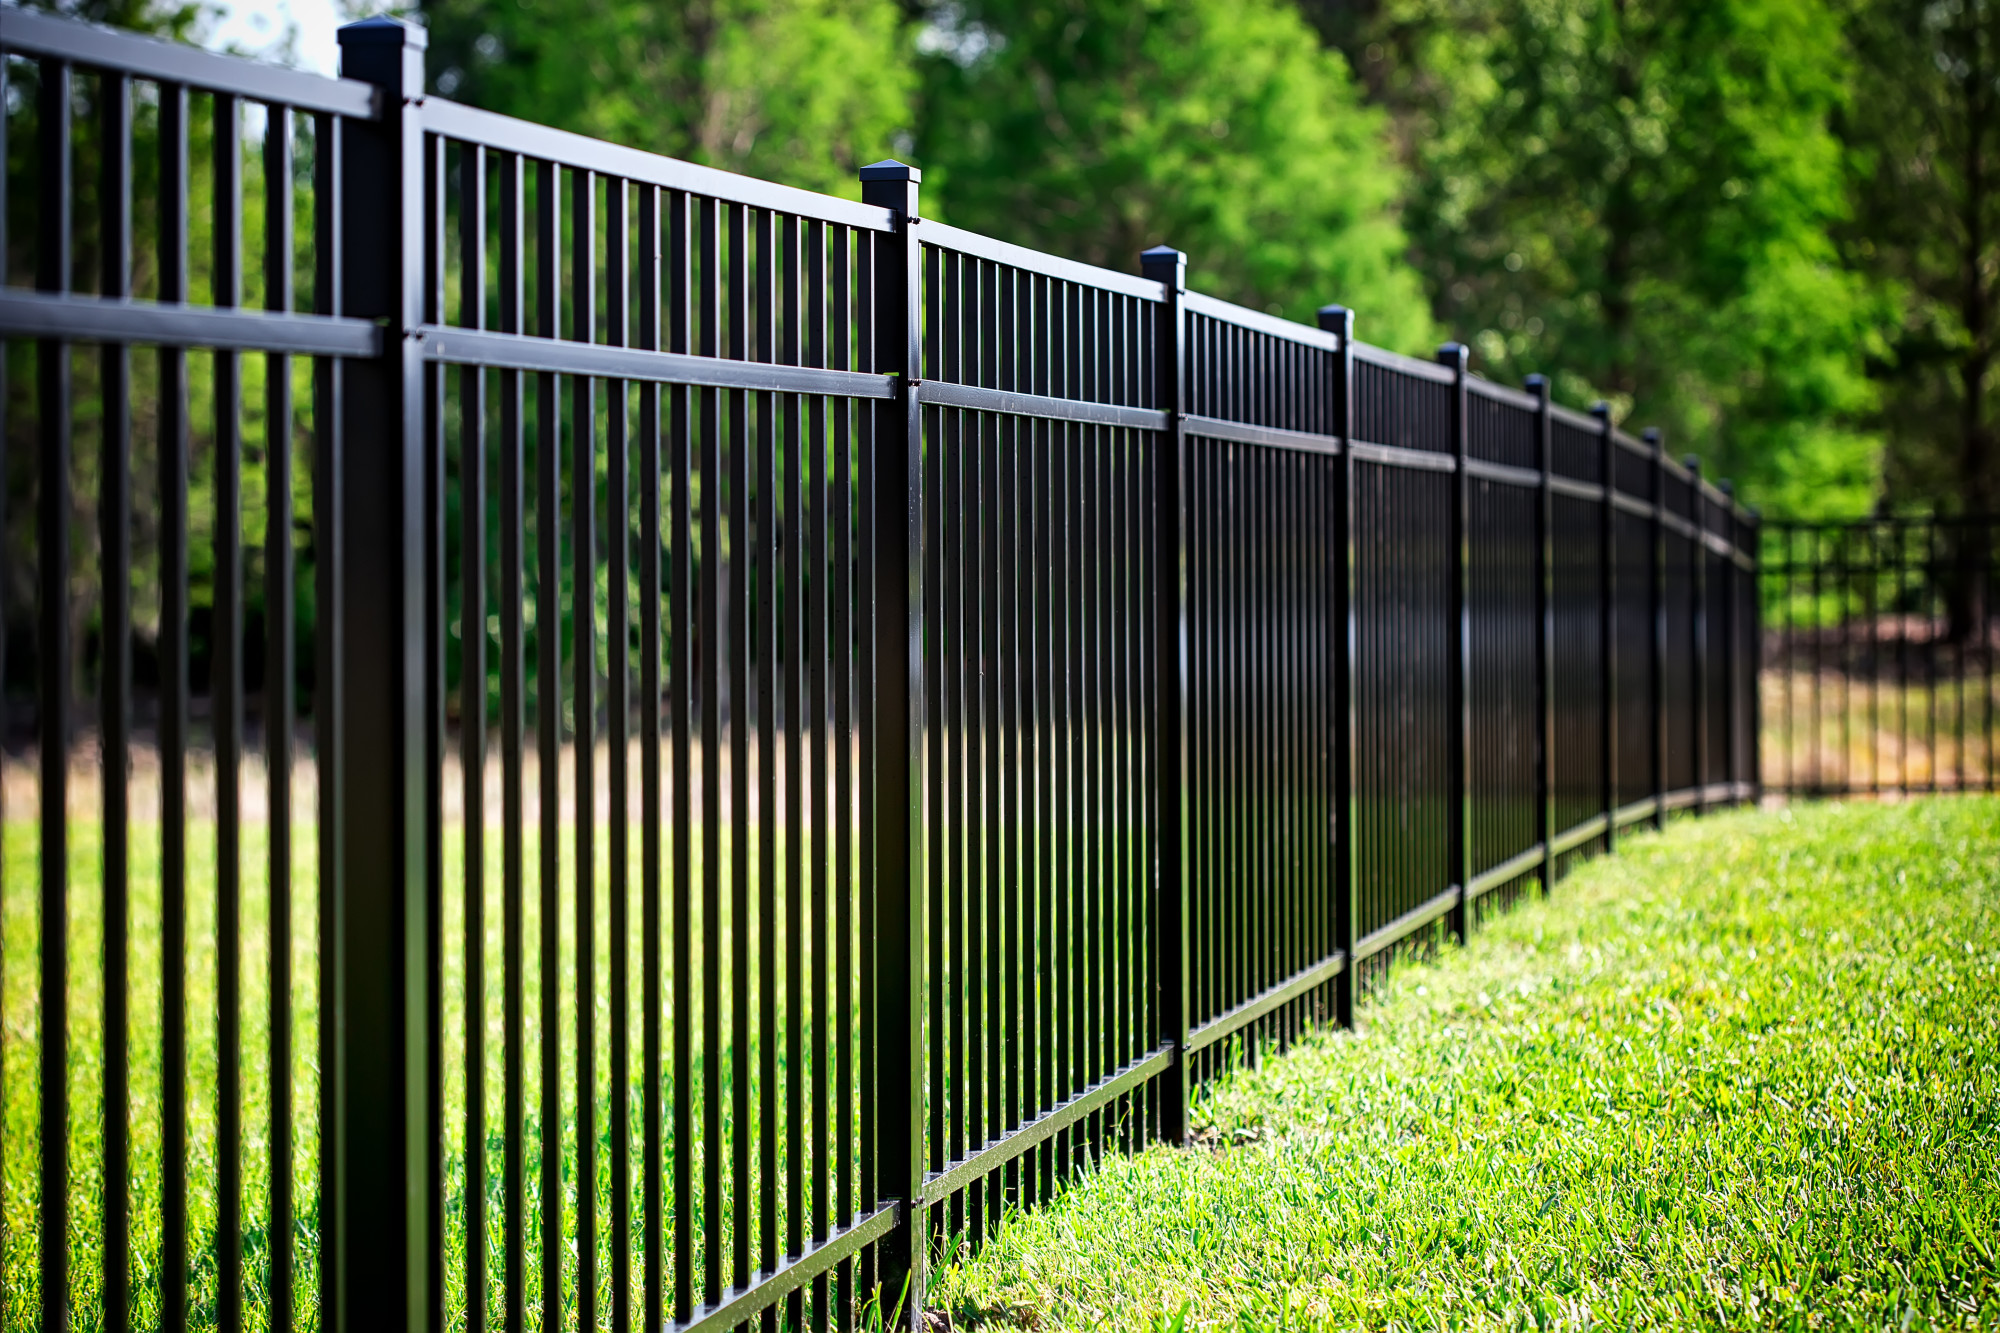 Fence companies near me: Do you want to know how to choose the right fencing contractor? Read on to learn how to make the right choice.